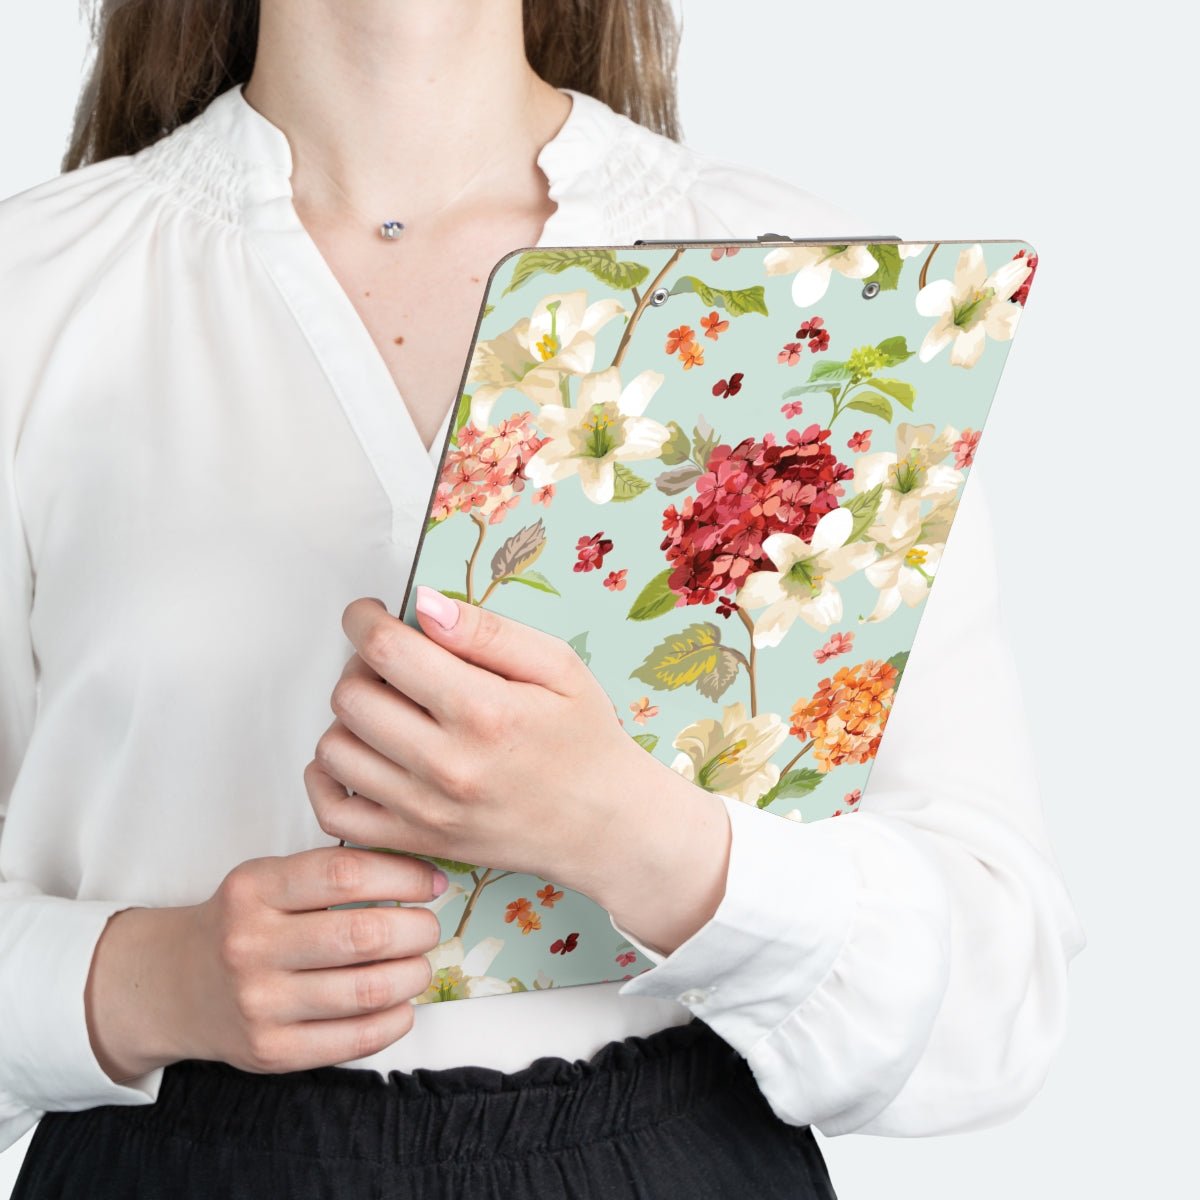 Autumn Hortensia and Lily Flowers Clipboard - Puffin Lime